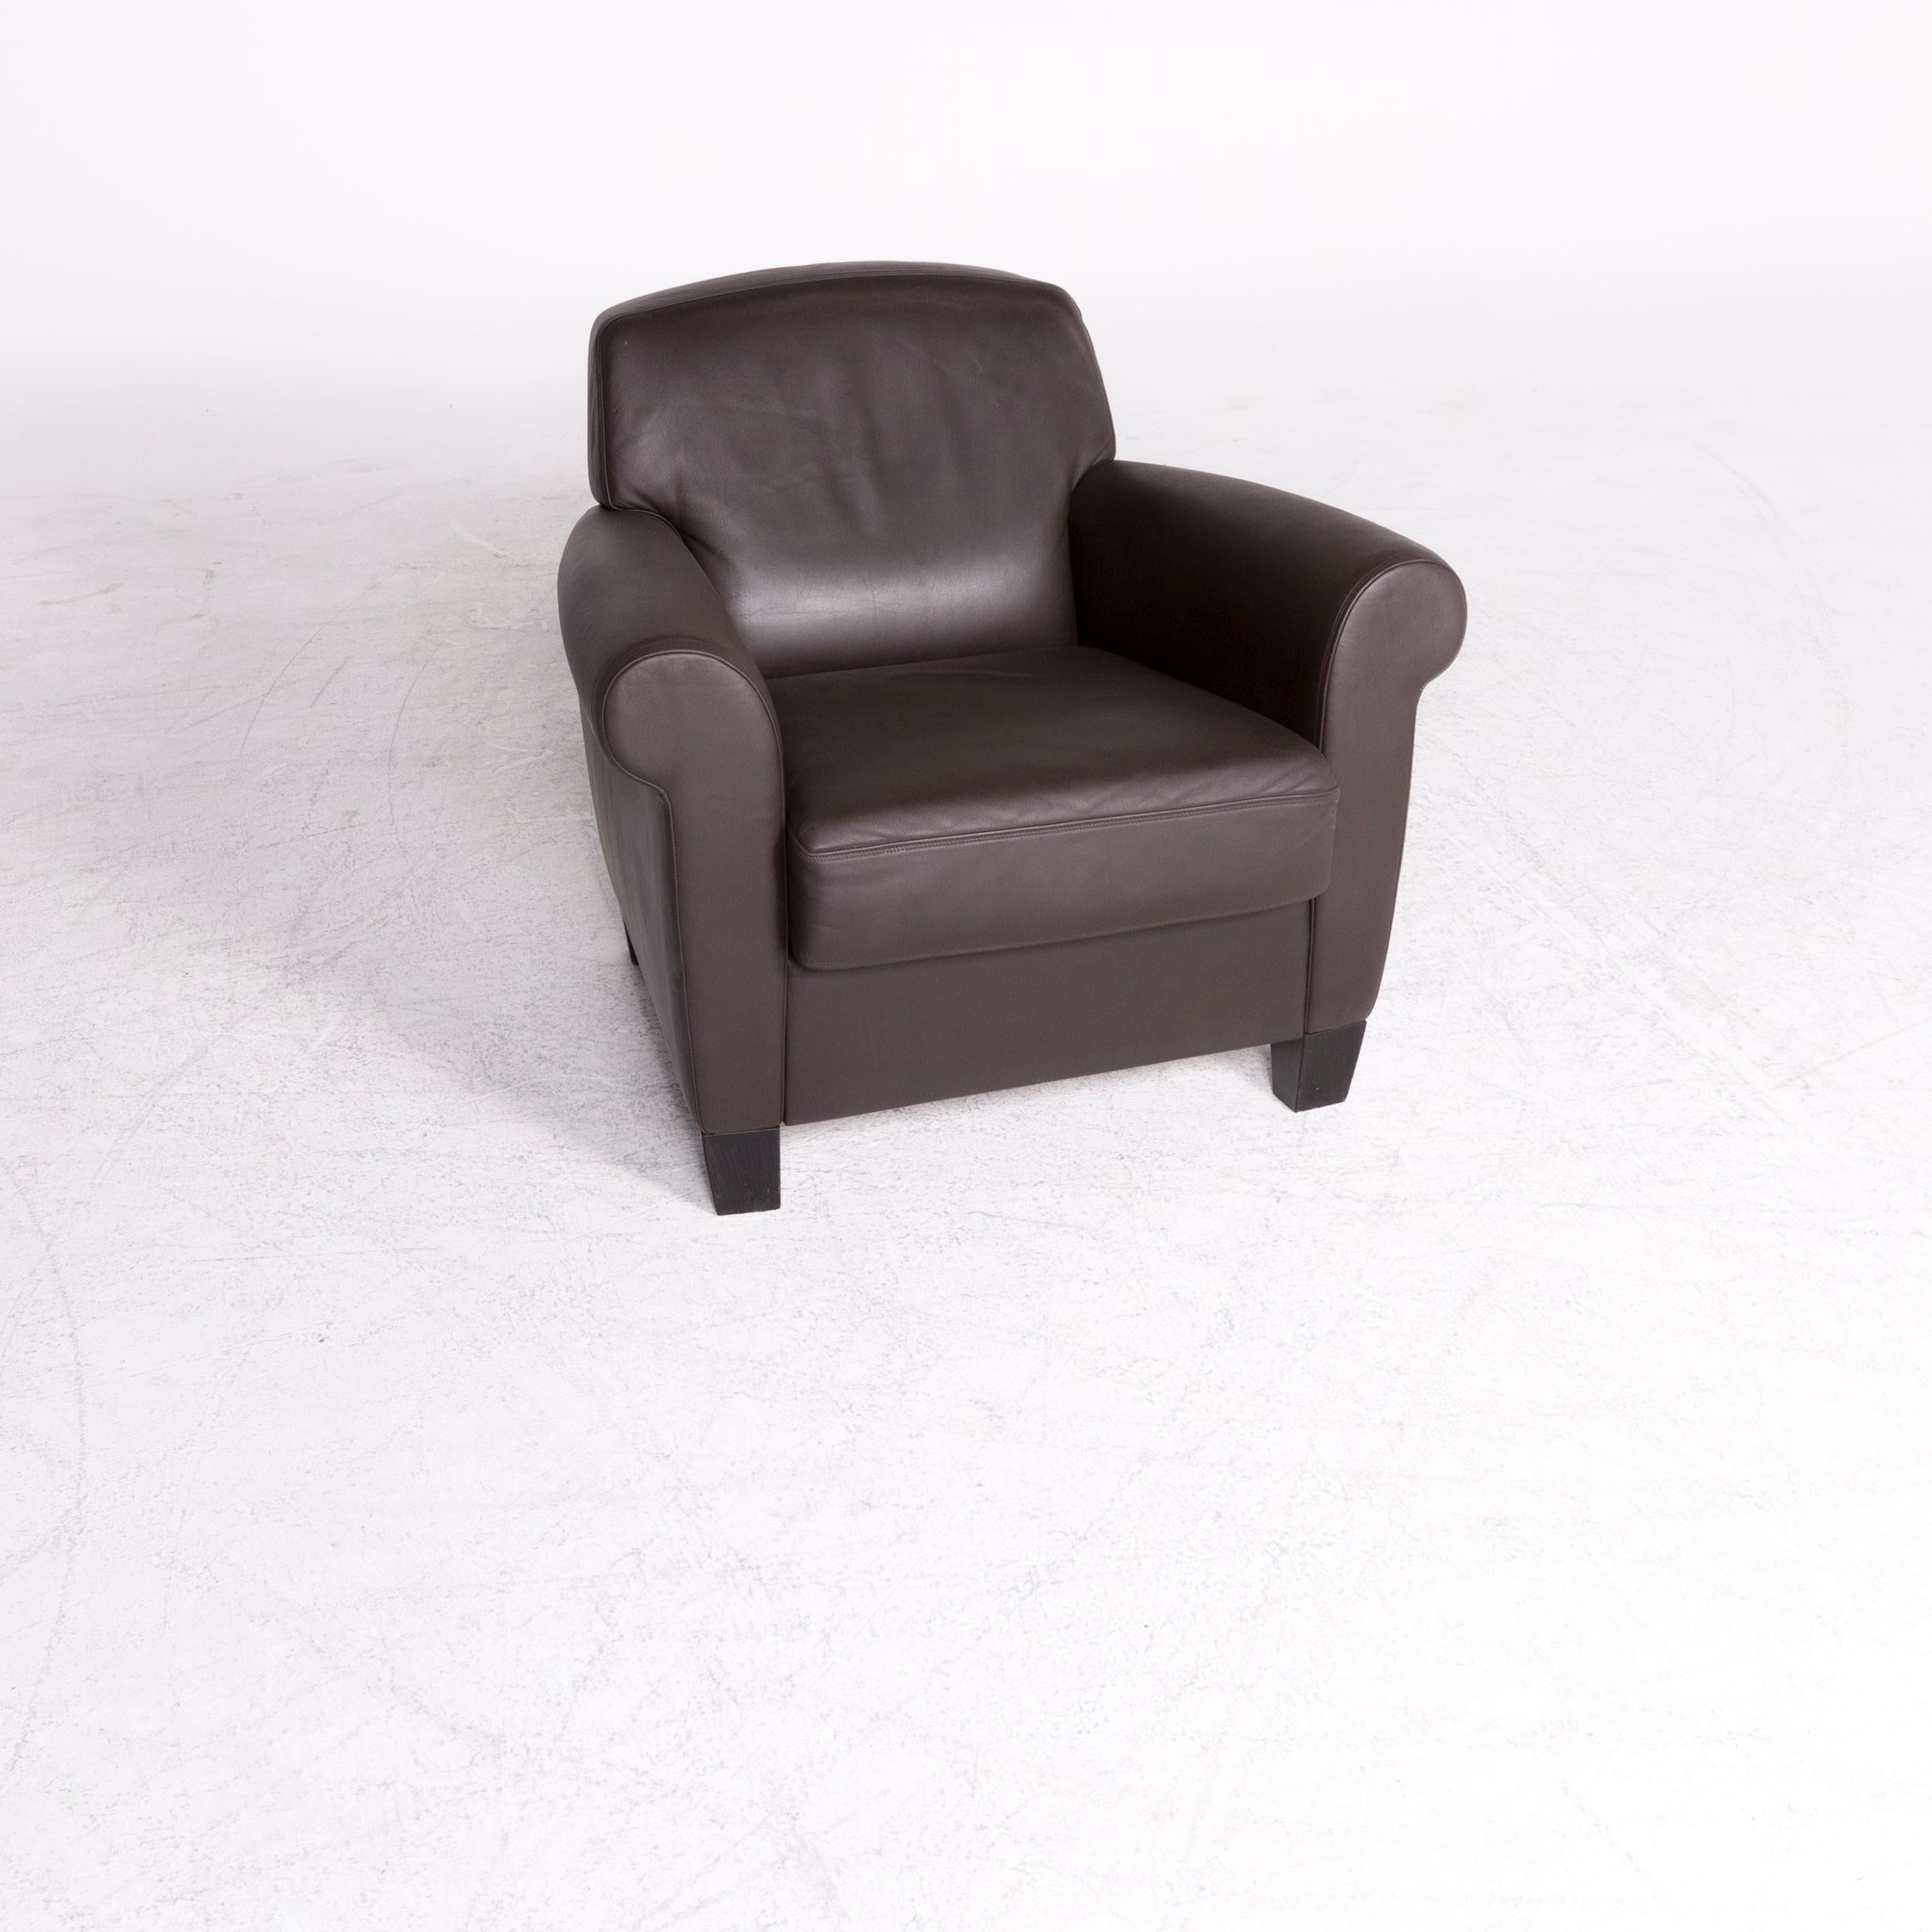 We bring to you a De Sede designer leather armchair brown genuine leather chair.

Product measurements in centimeters:

Depth 88
Width 87
Height 78
Seat-height 45
Rest-height 62
Seat-depth 54
Seat-width 52
Back-height 36.
 